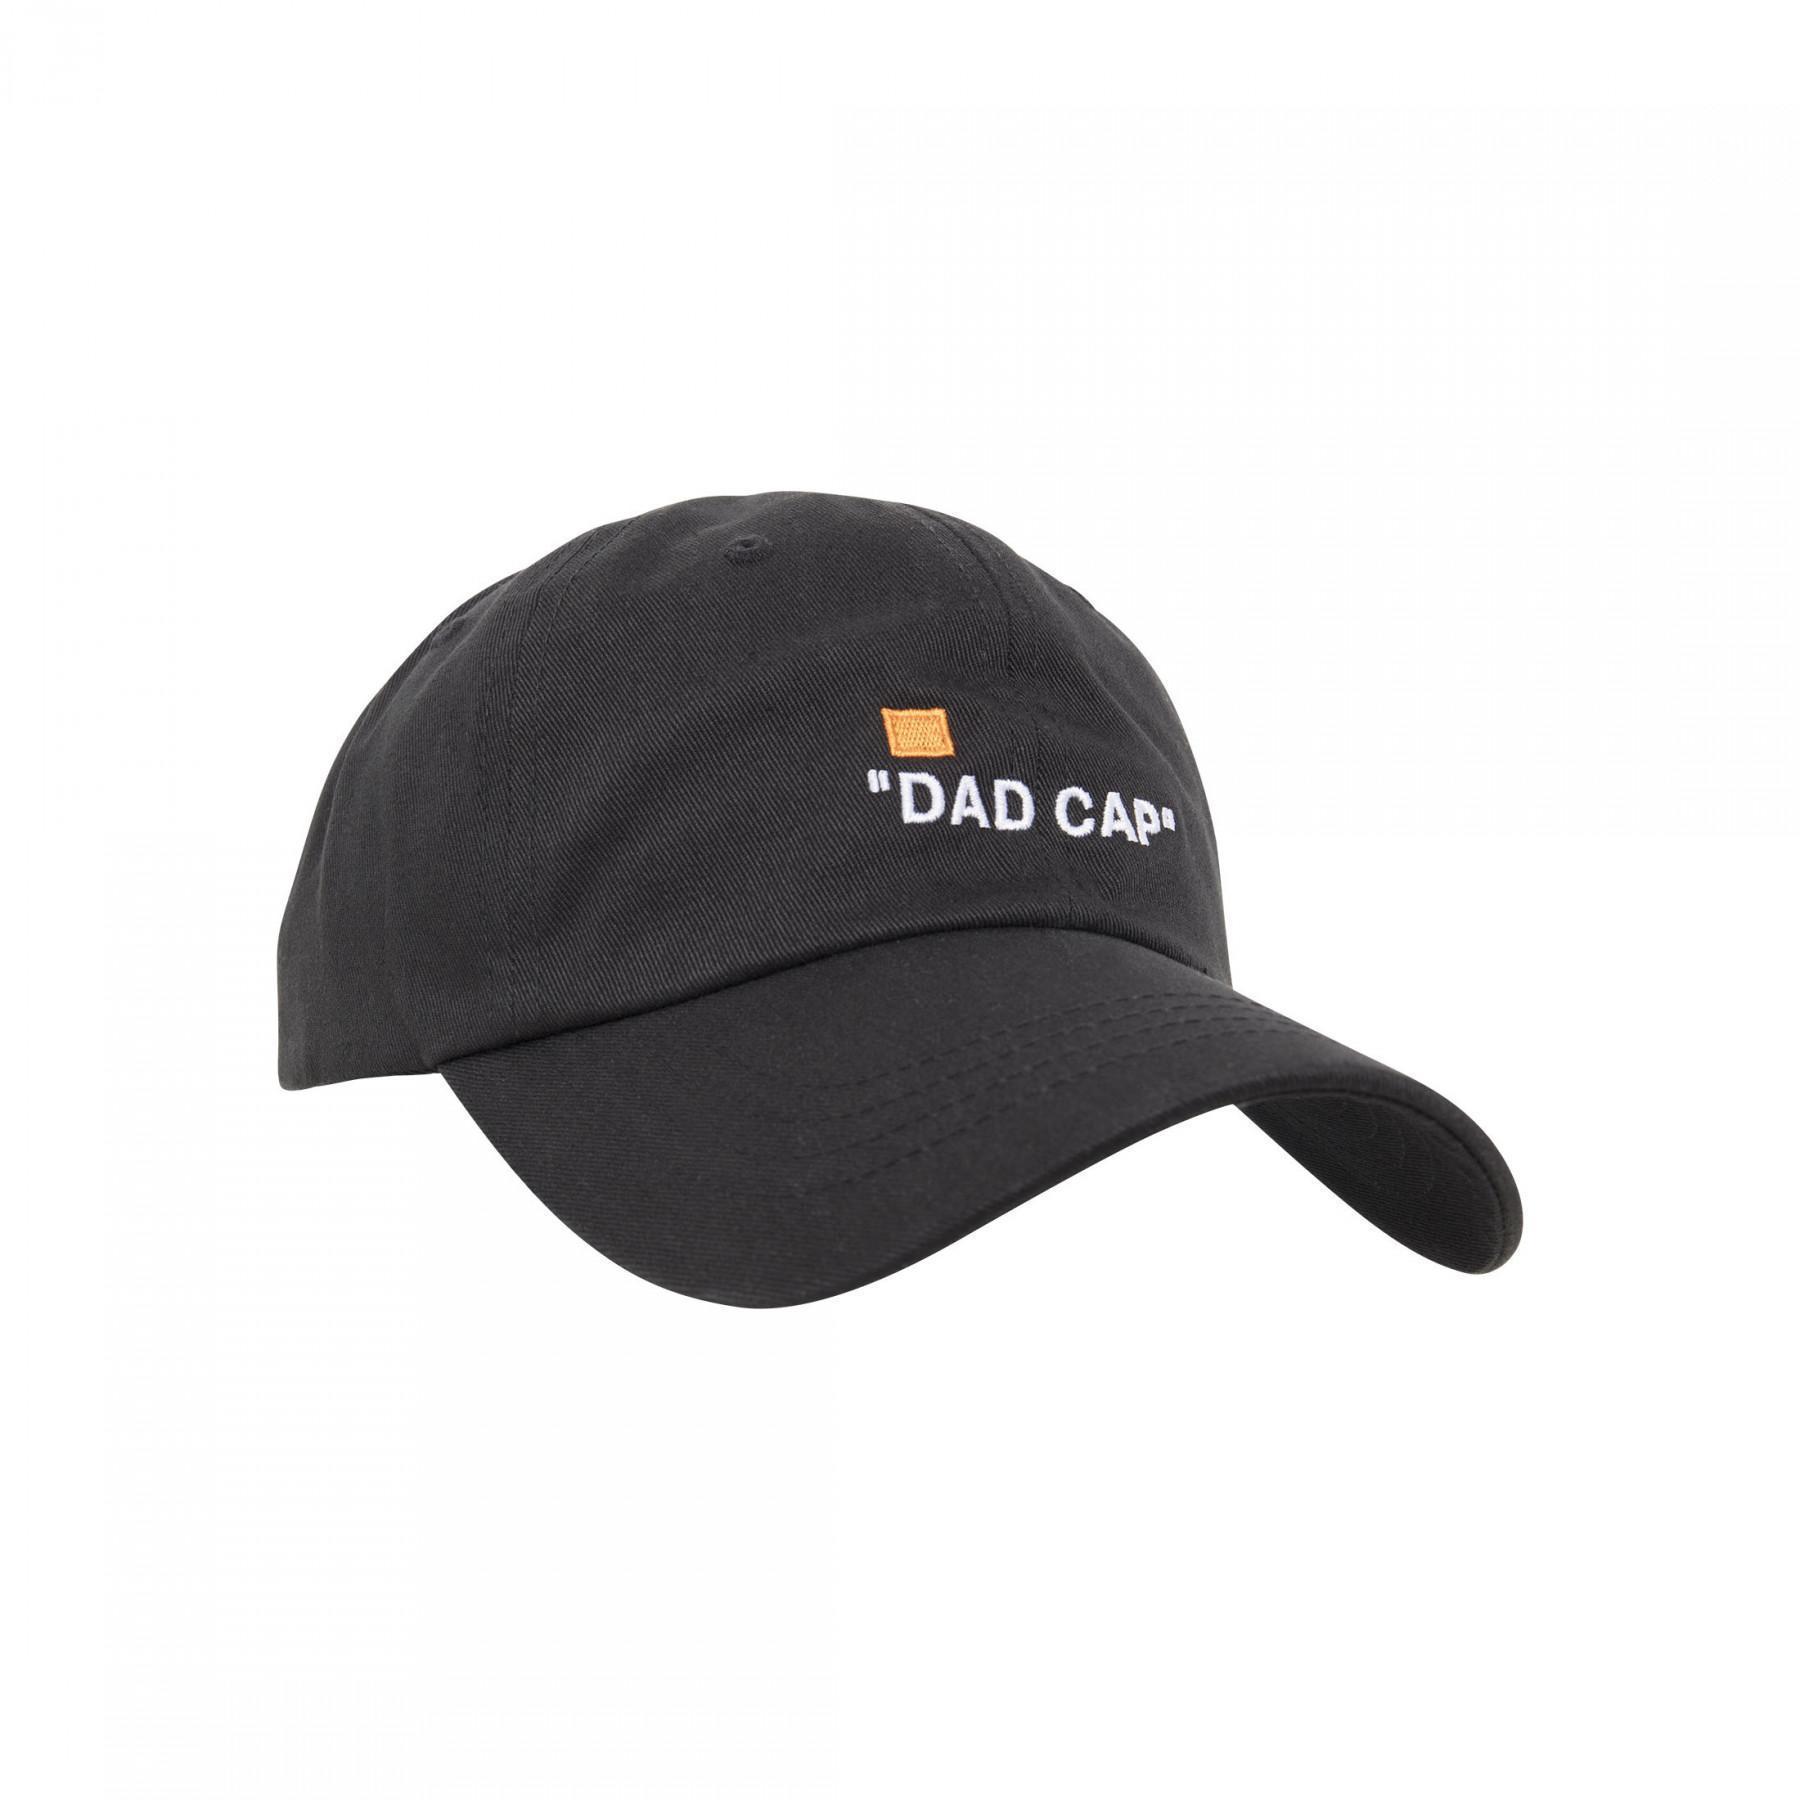 Casquette Mister Tee dad basic